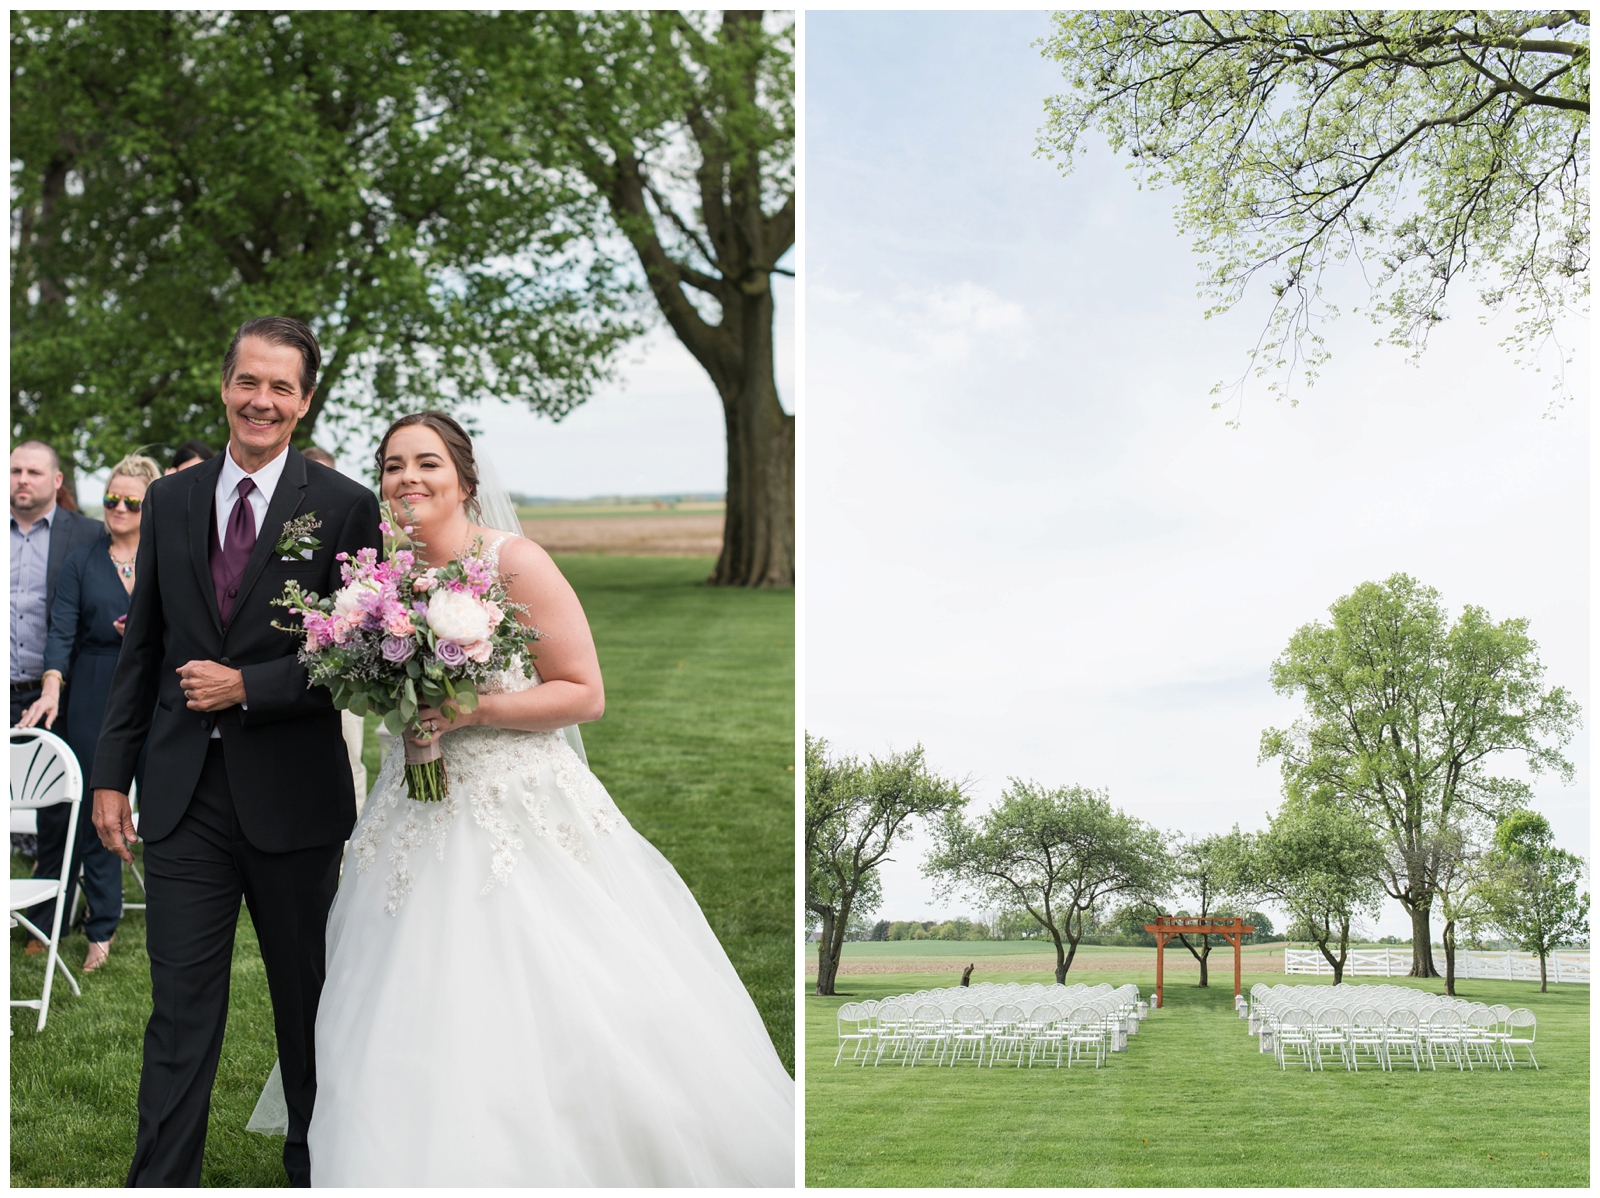 bride and father walk down aisle during outdoor wedding ceremony at Pretty Prairie Farms